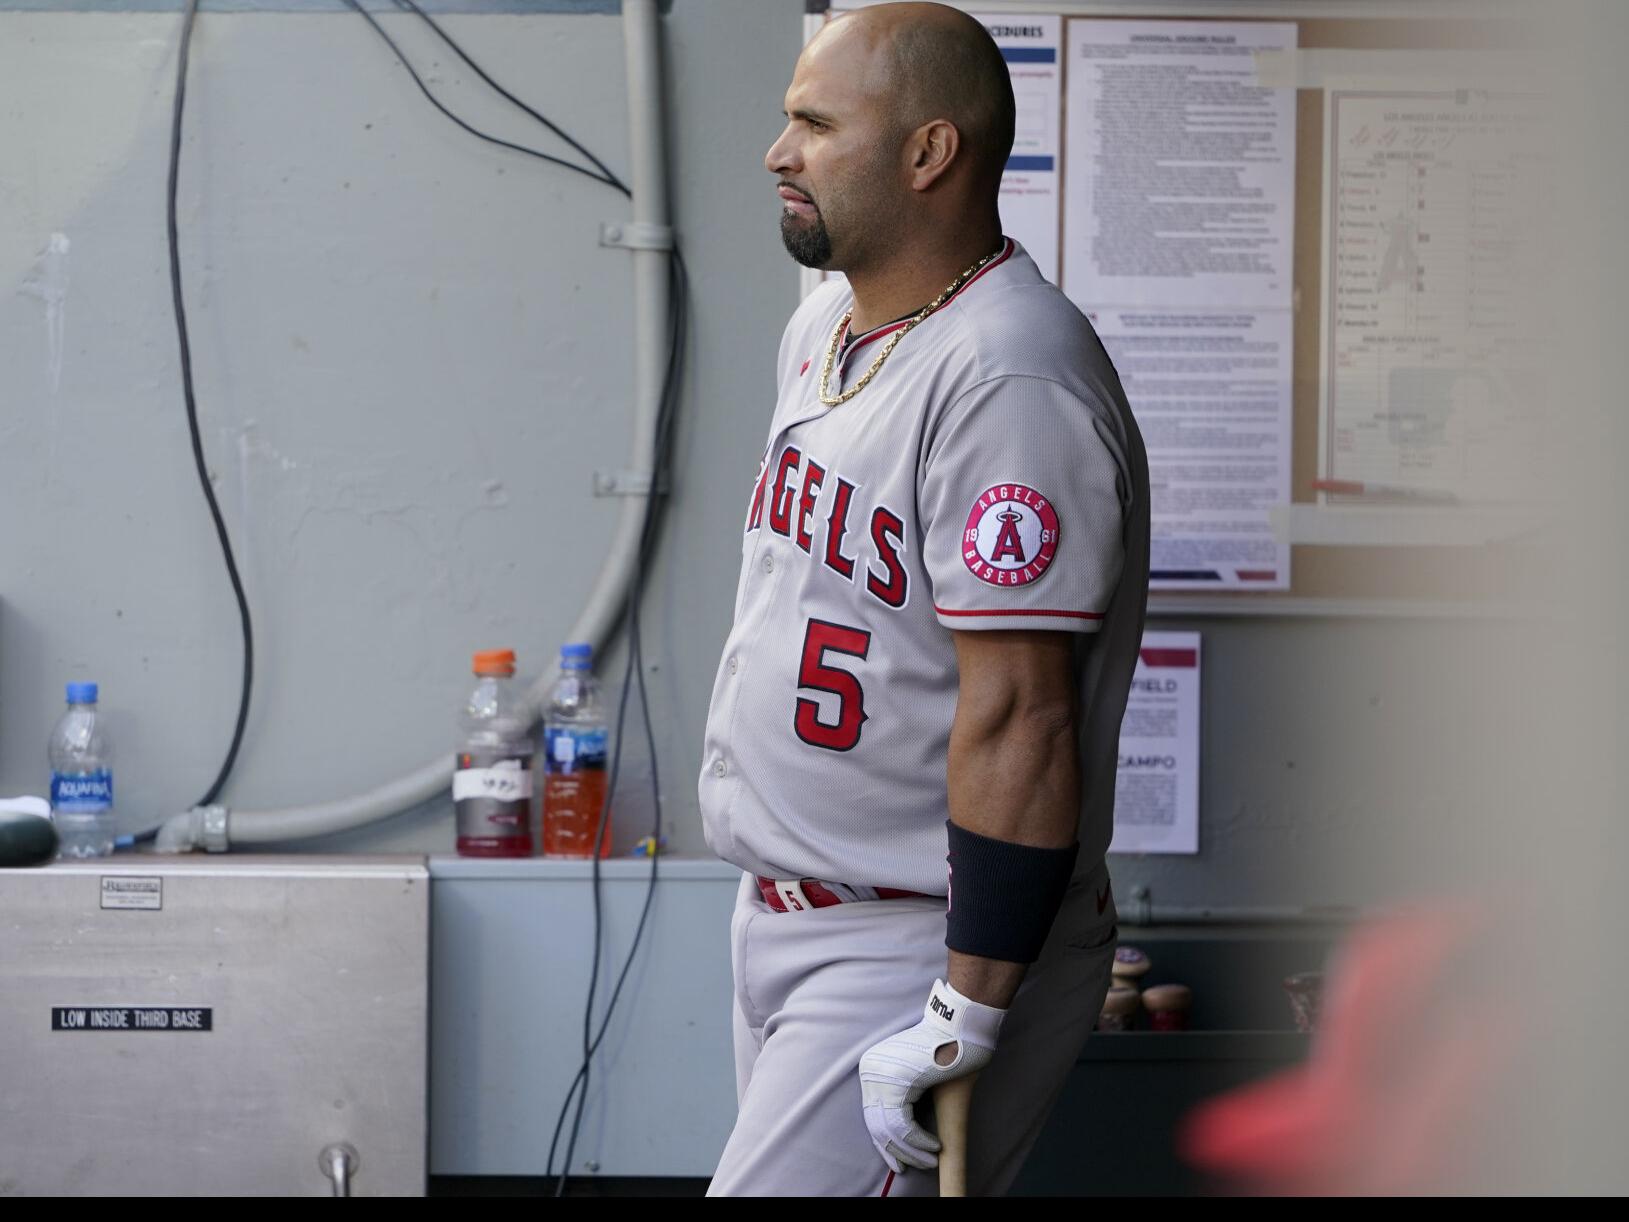 Pujols moves to Dodgers, disputes Angels' everyday claims, Pro Sports